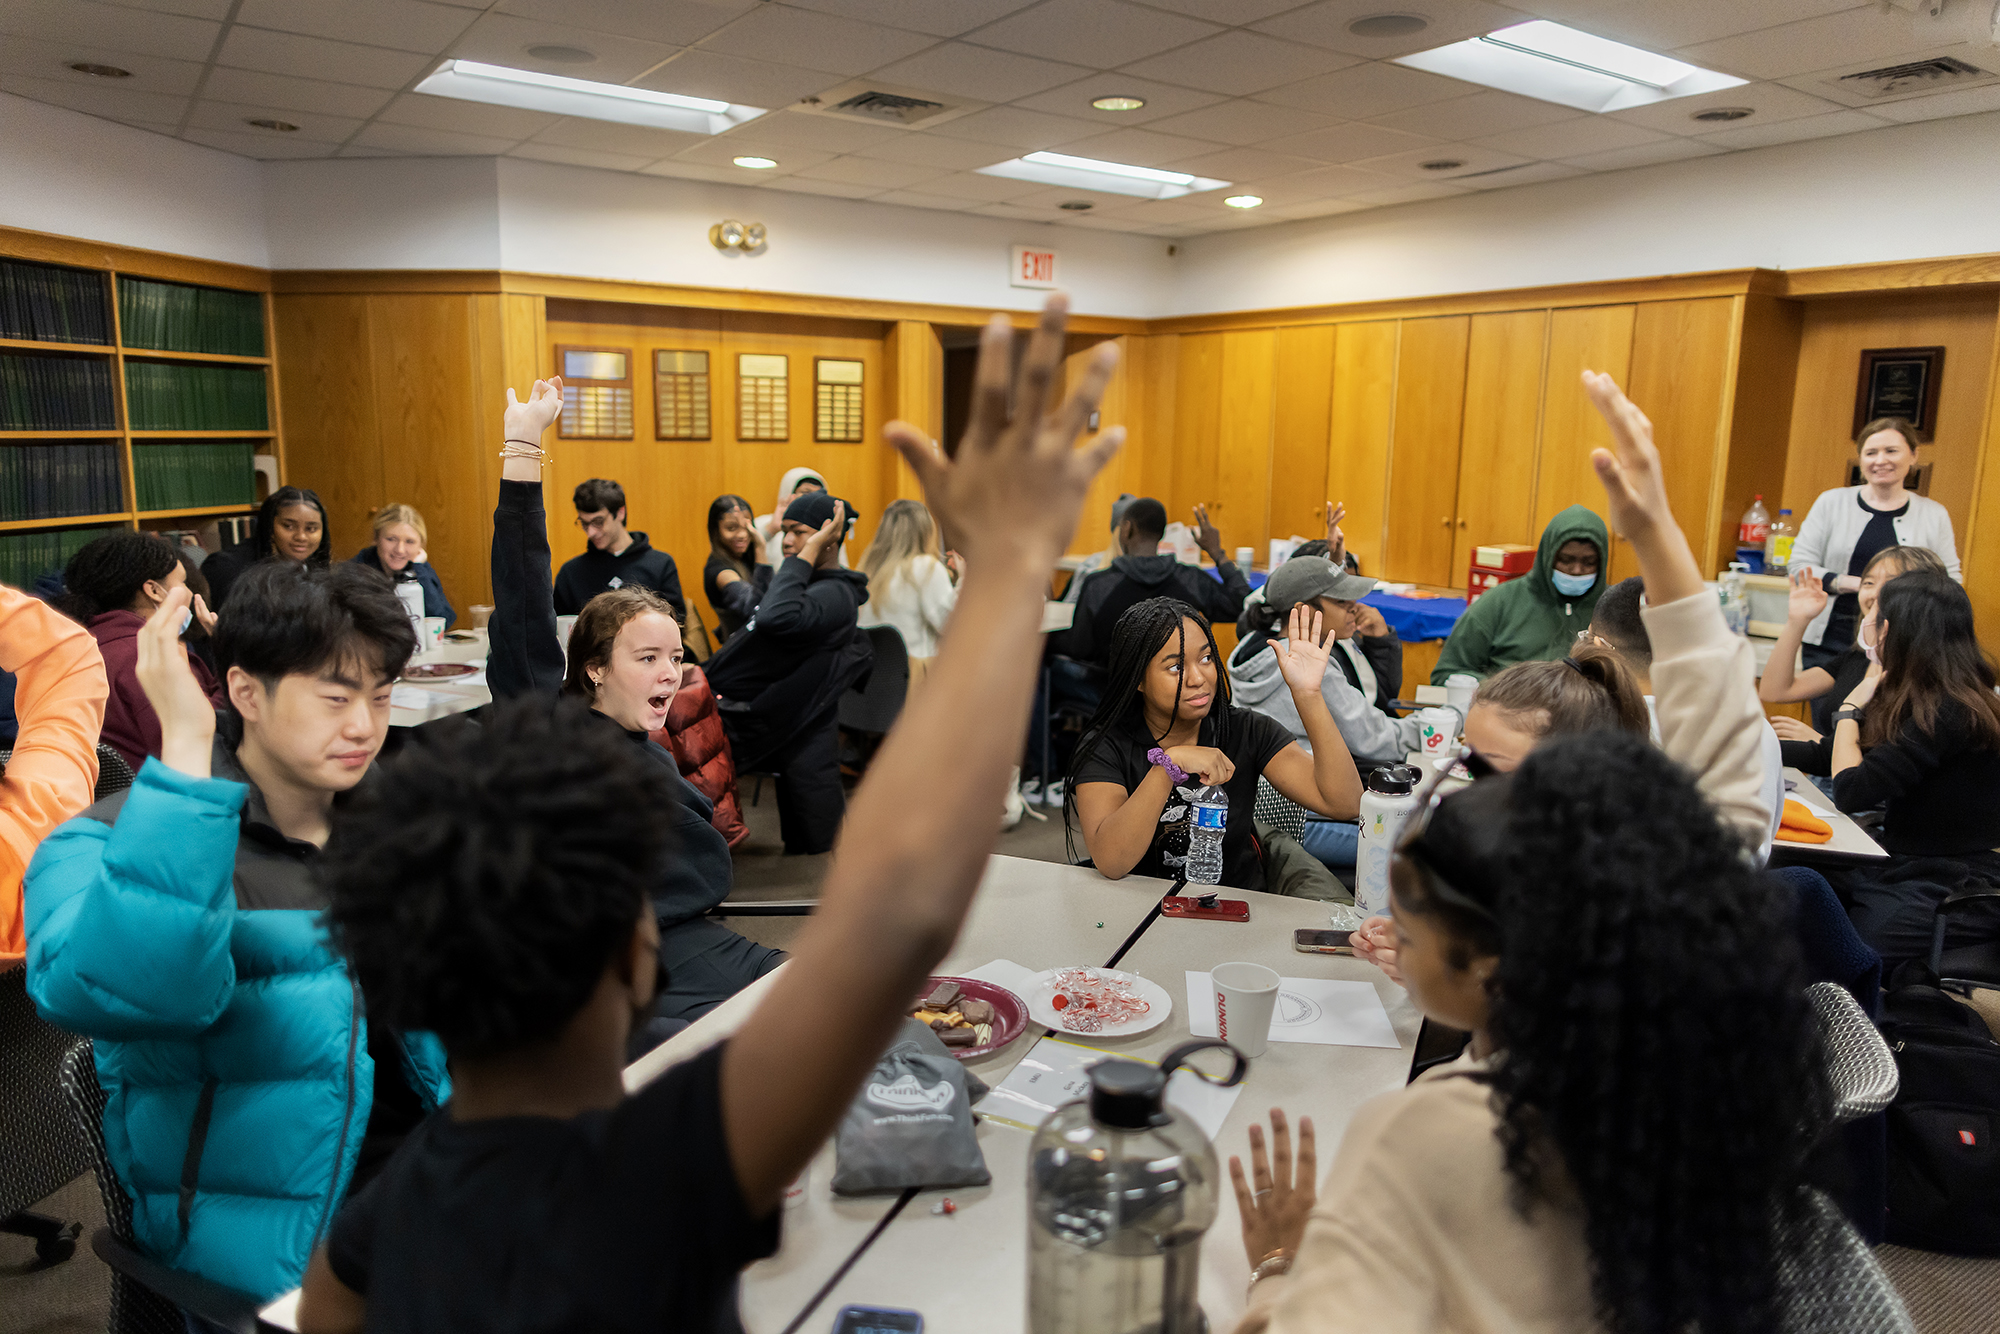 Students from Penn and Robeson High School raise their hands to answer quiz questions.